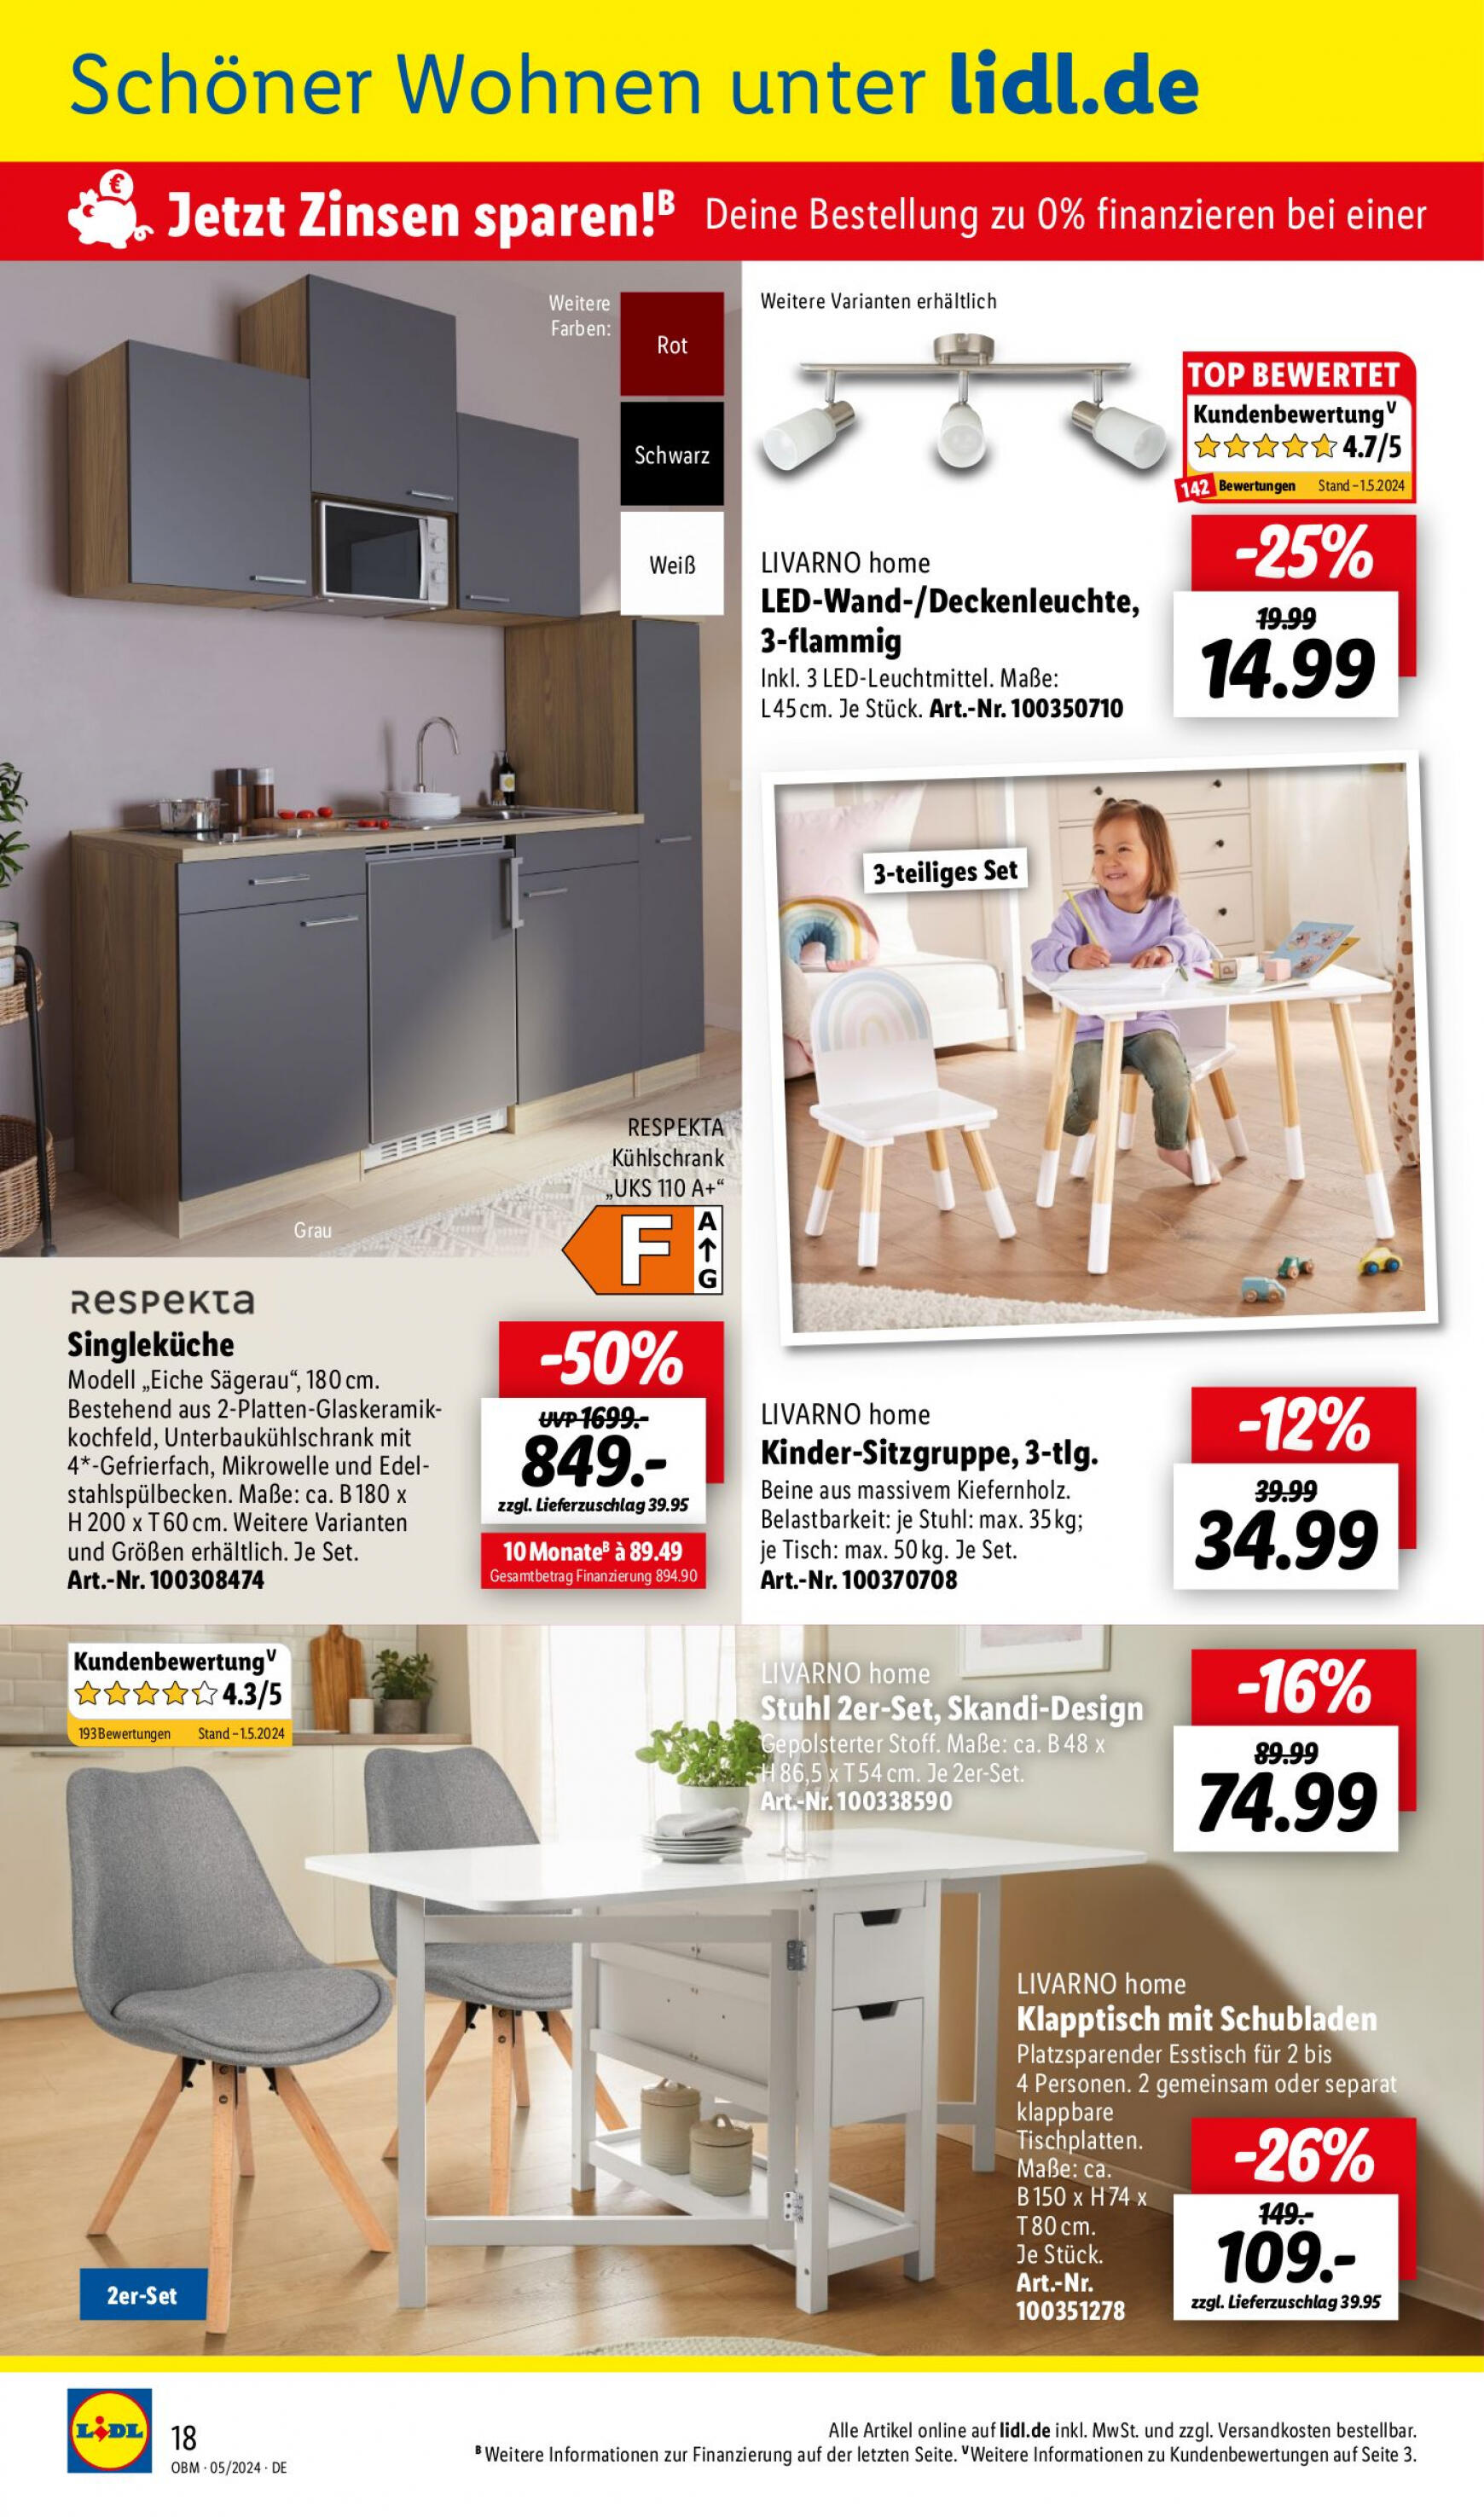 lidl - Flyer Lidl - Aktuelle Onlineshop-Highlights aktuell 01.05. - 31.05. - page: 18